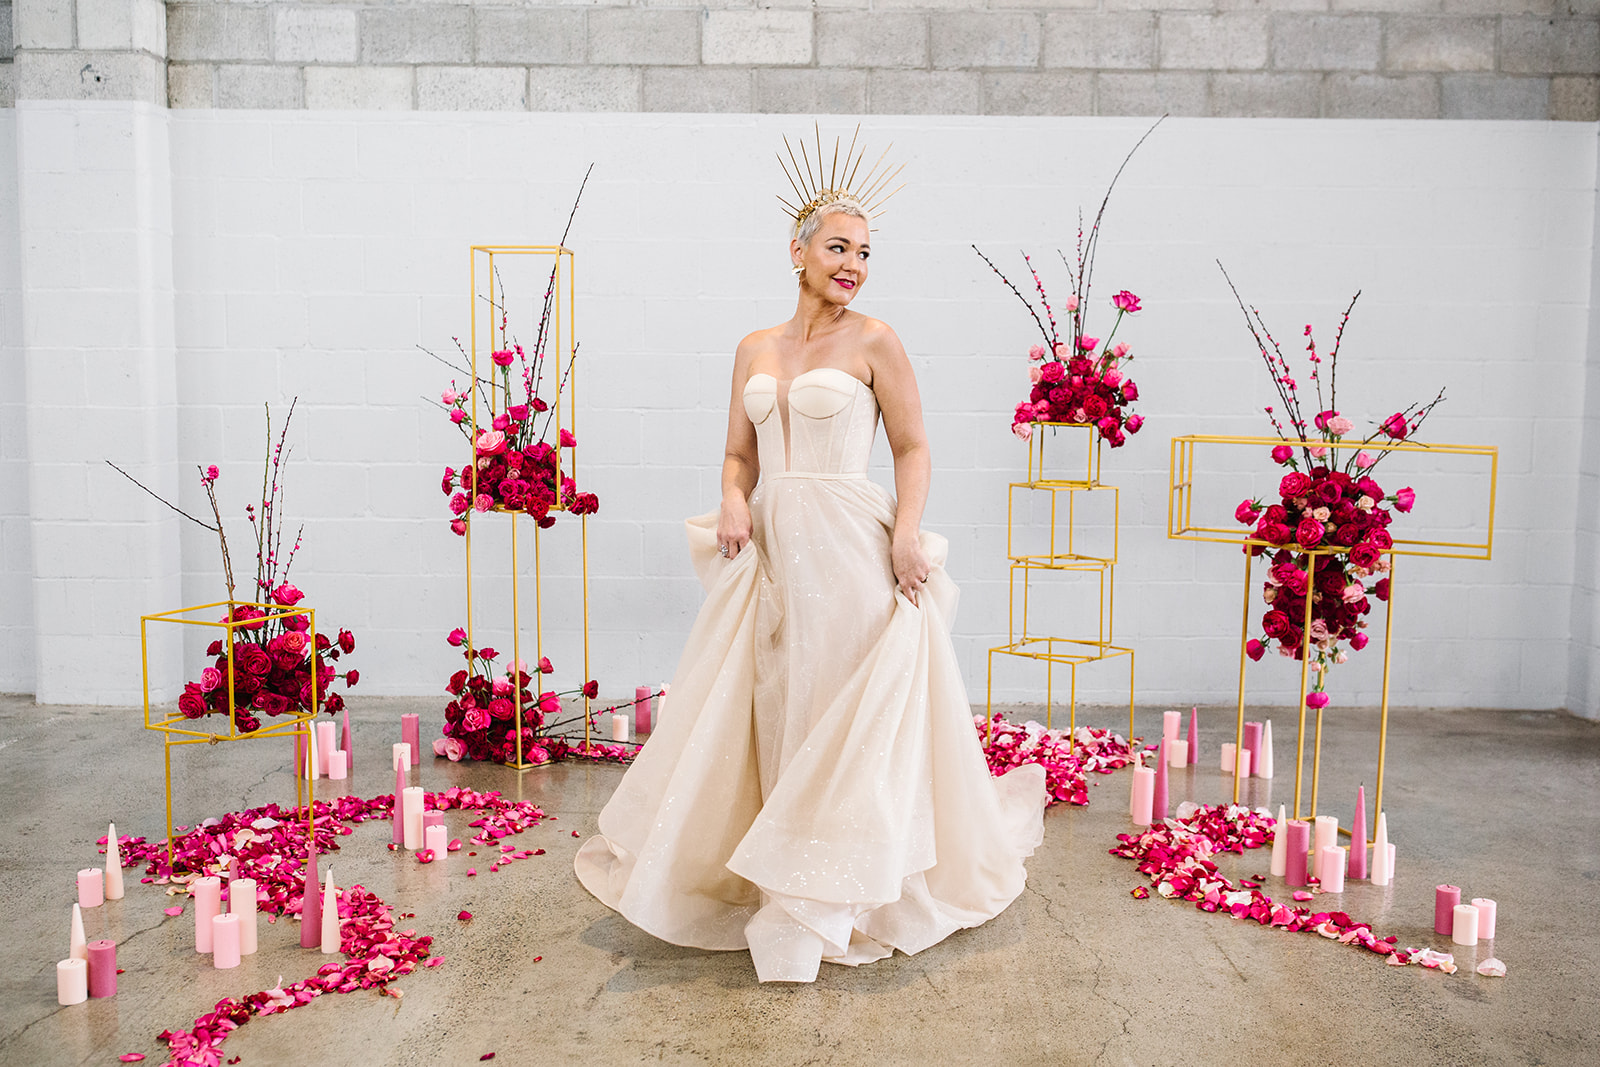 camilla kirk photography gold coast weddings bridal gowns floral designer signage cakes stationery